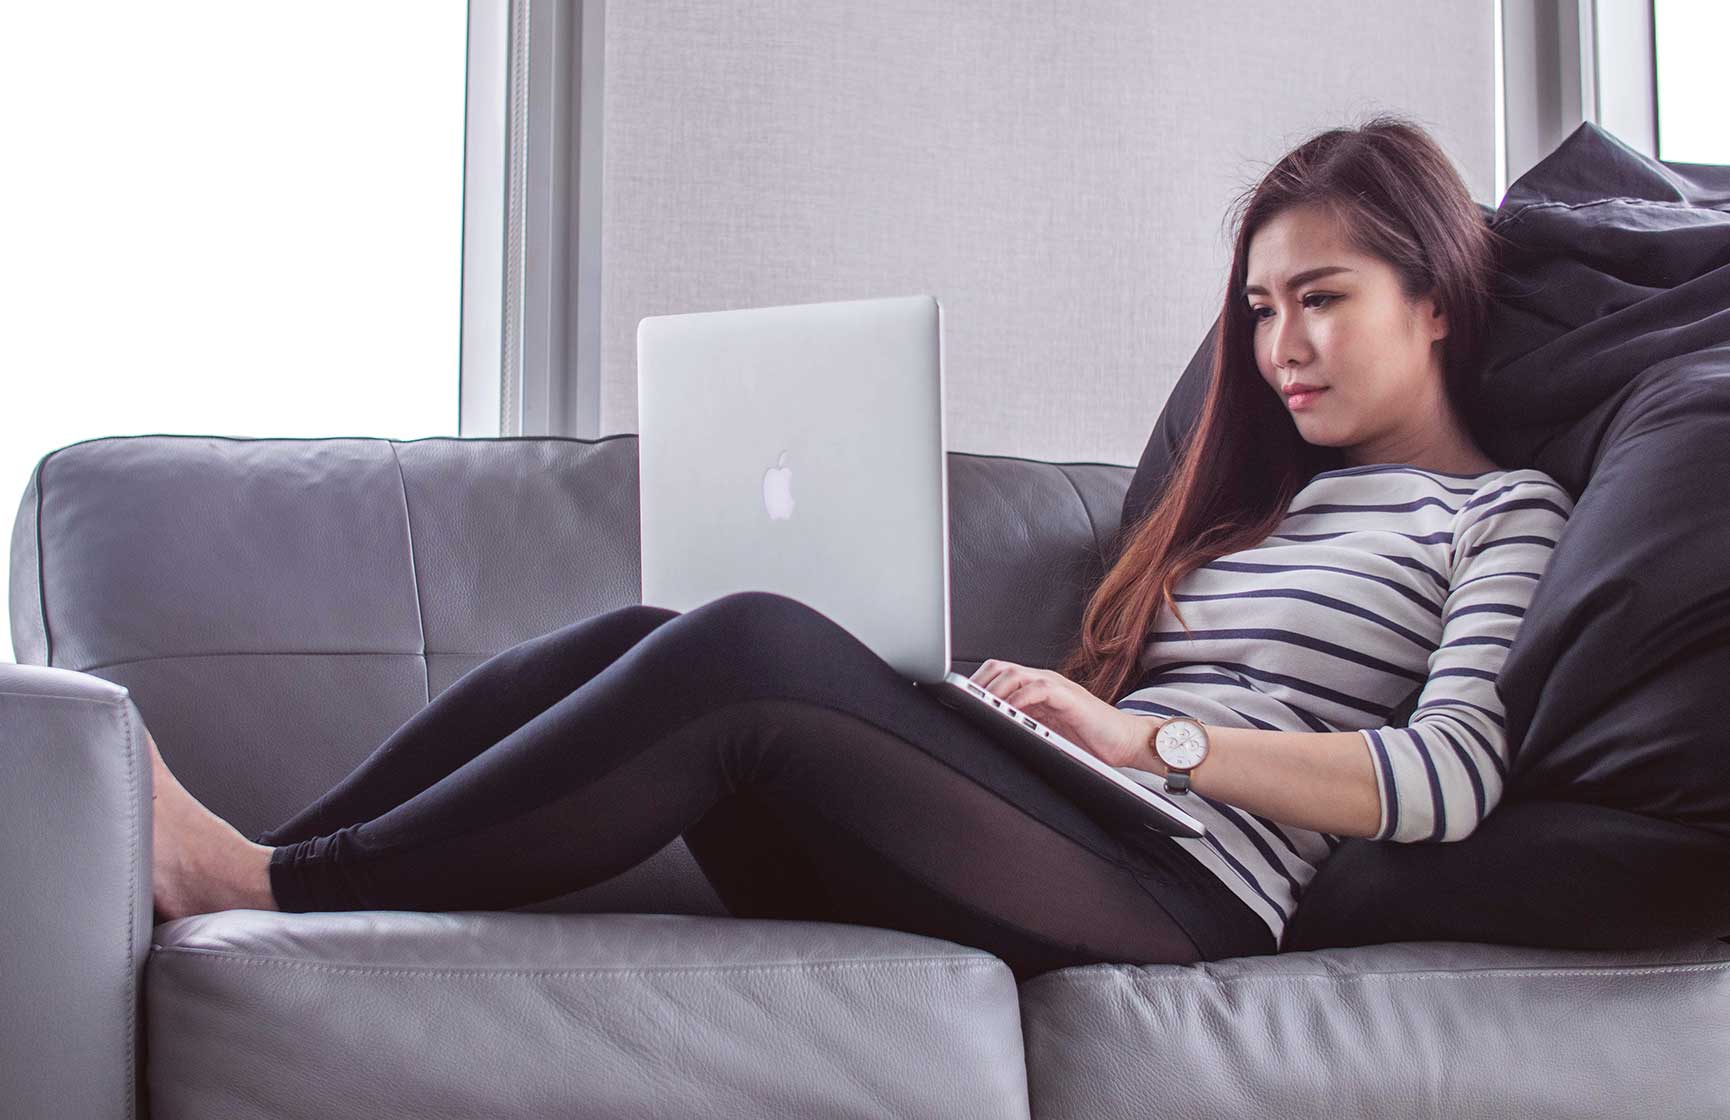 Woman on couch working on laptop.